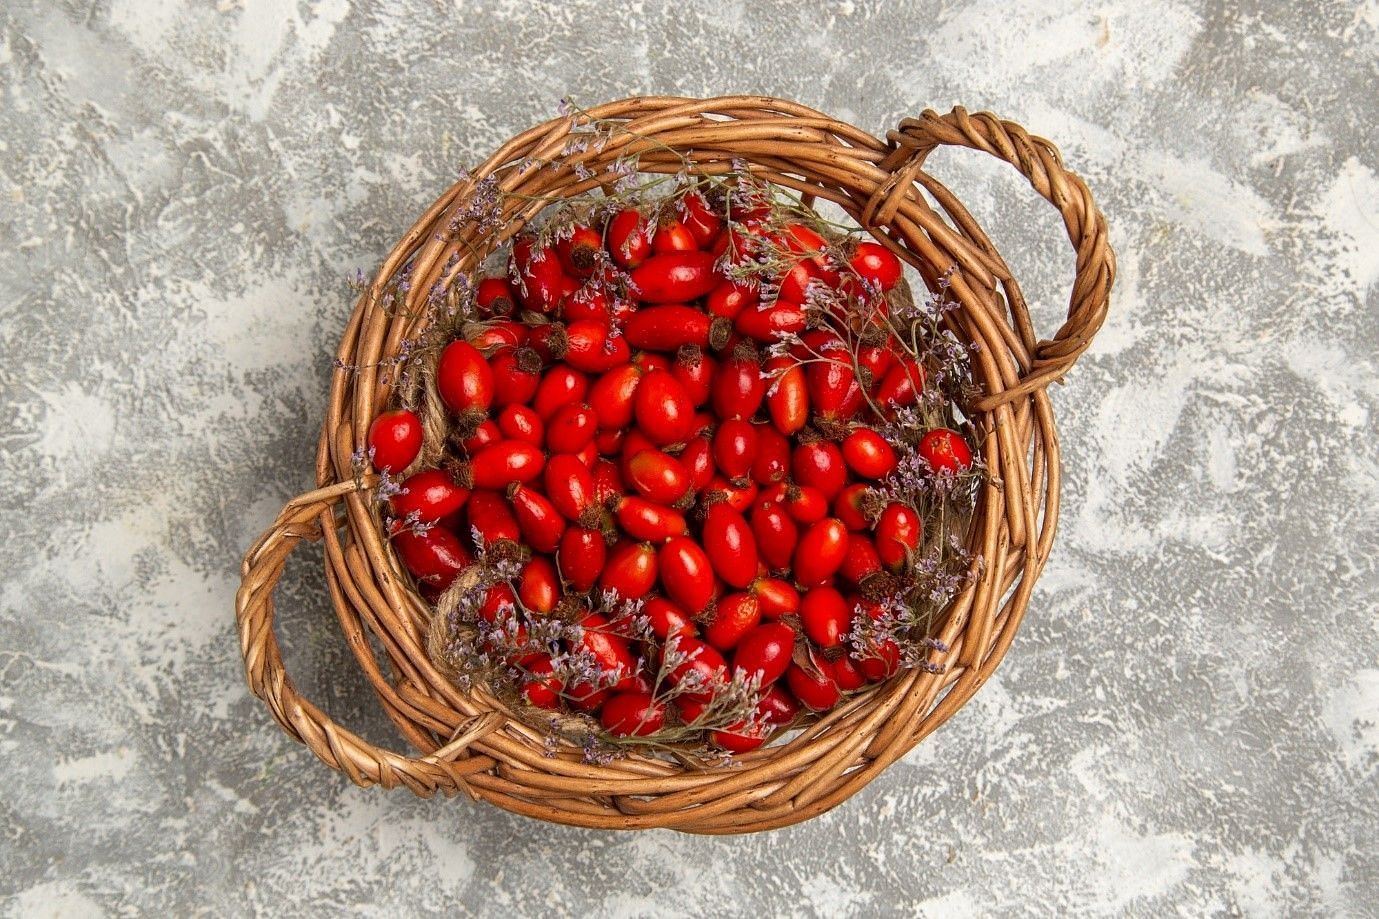 Berberine is a natural supplement which has many benefits (image by kamranaydinov on freepik)